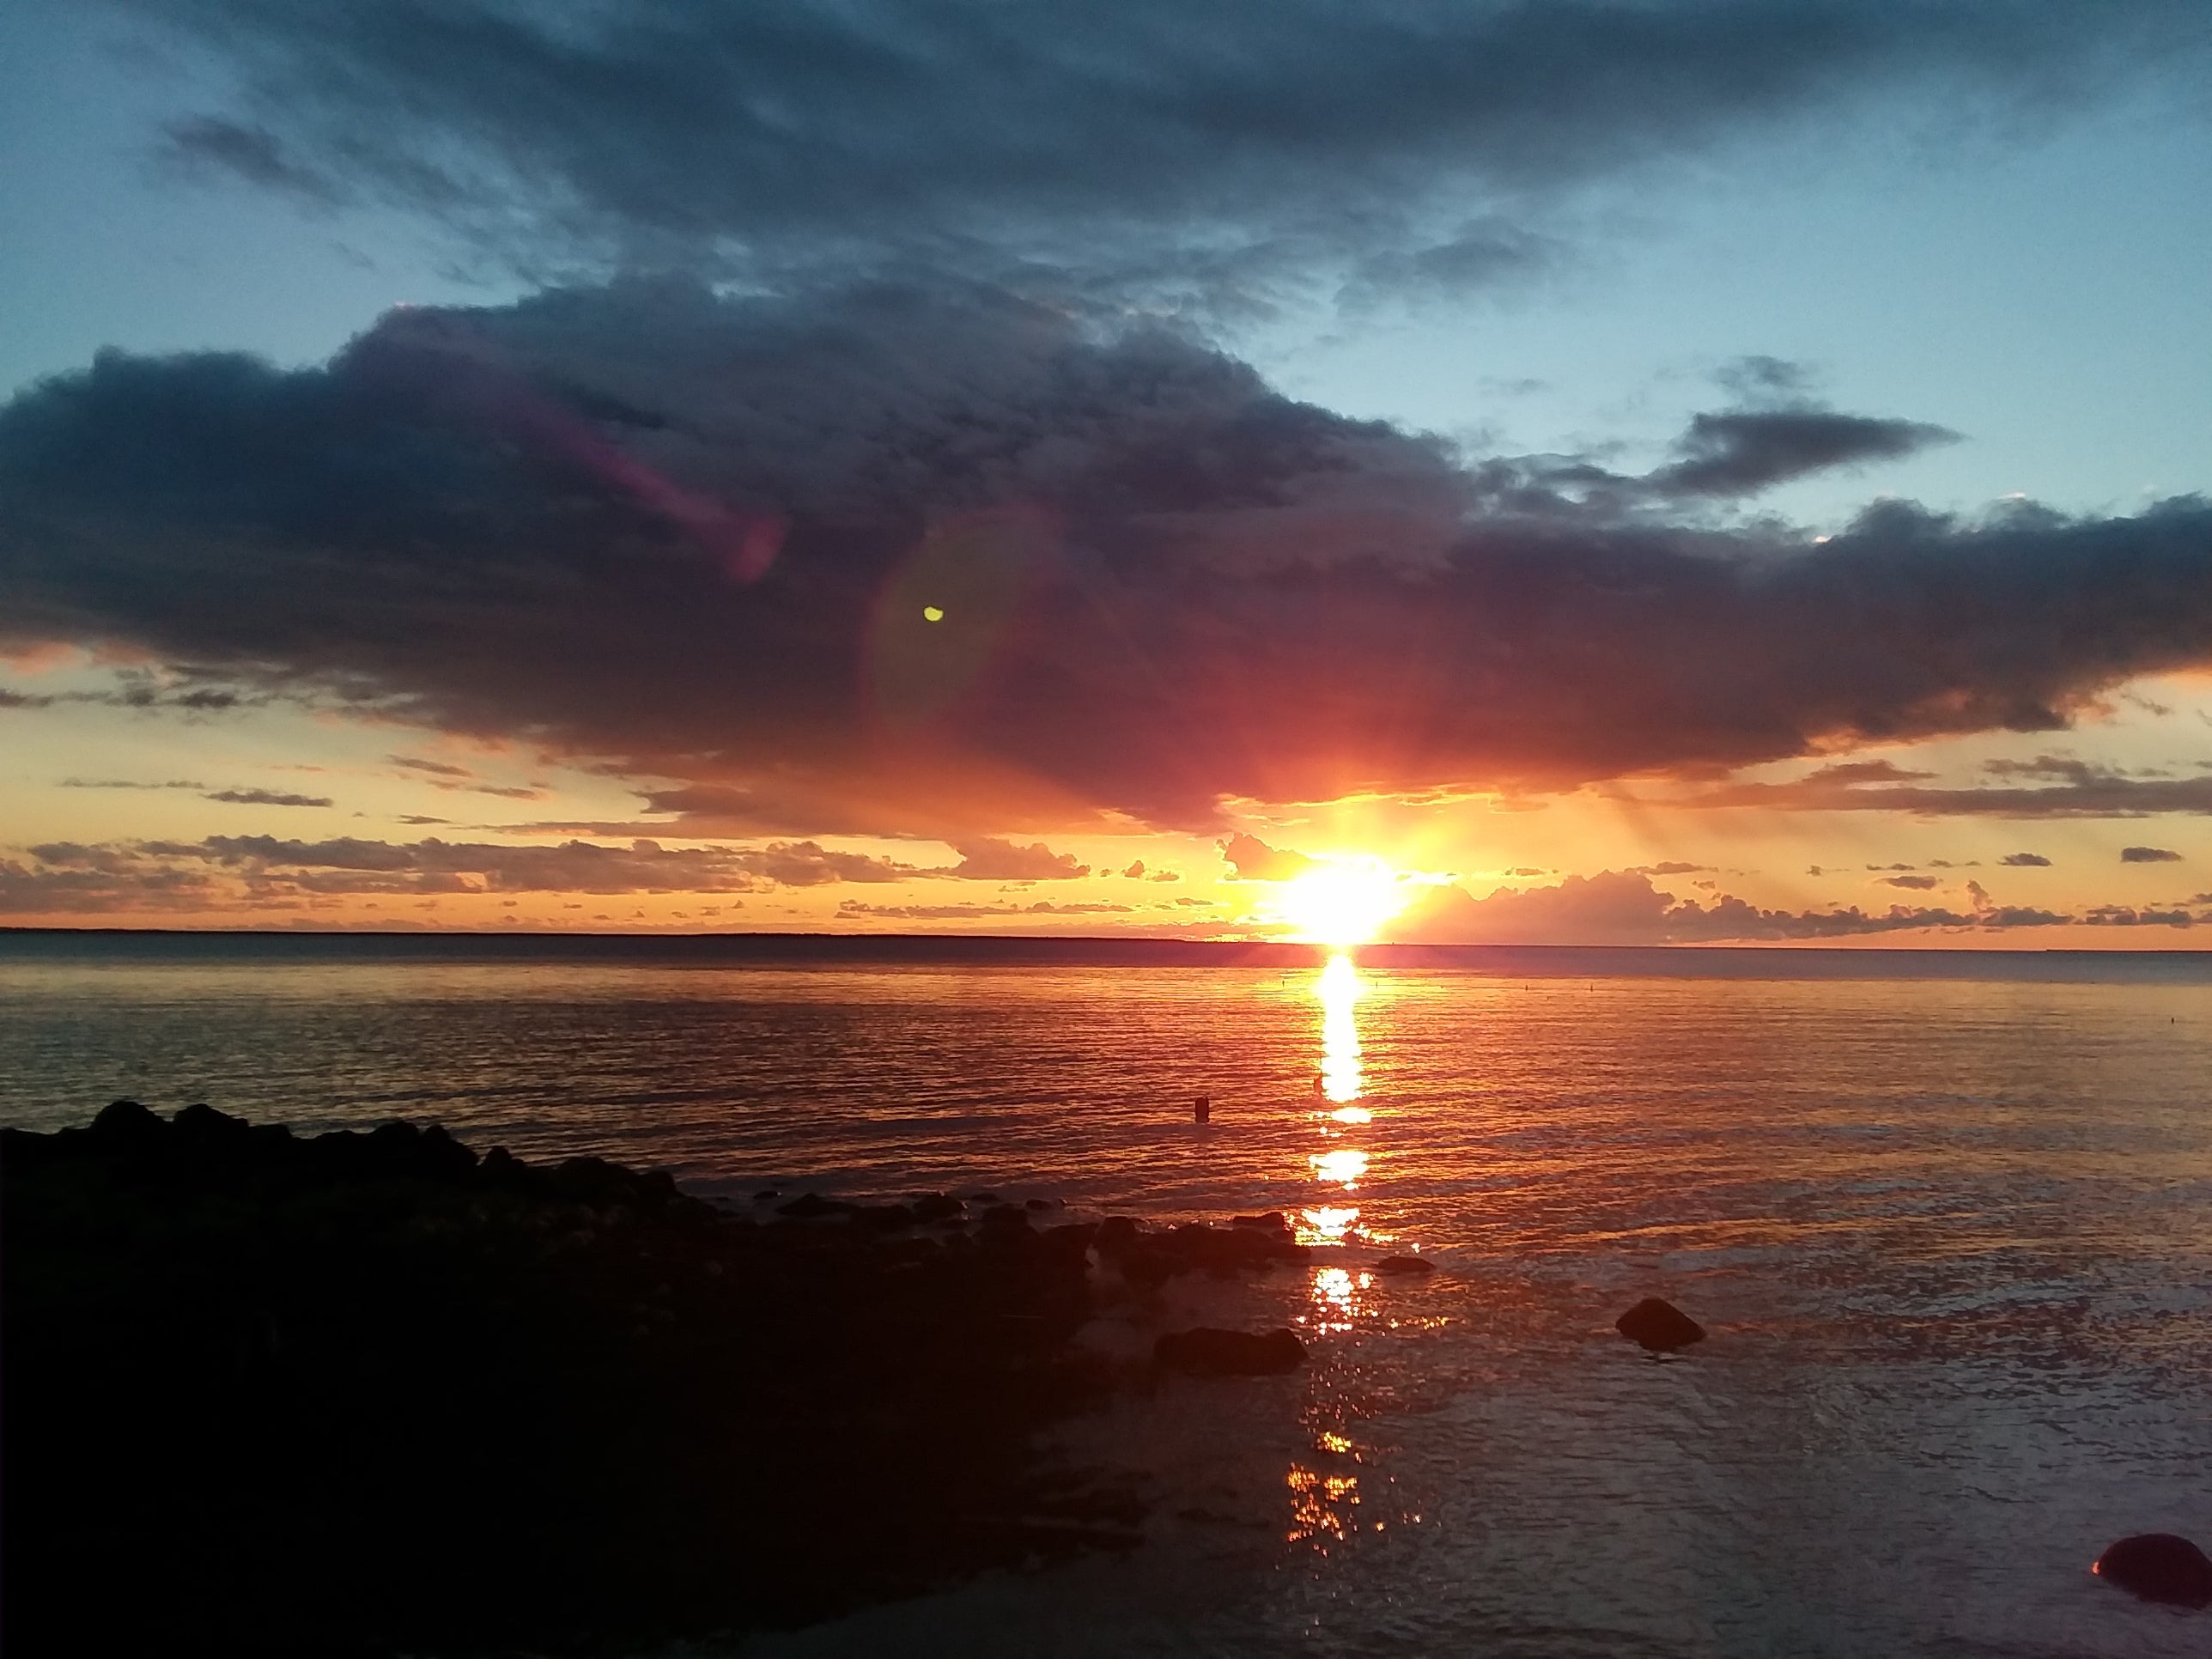 Amazing sunsets here in North Cove at the mouth of Willapa Bay